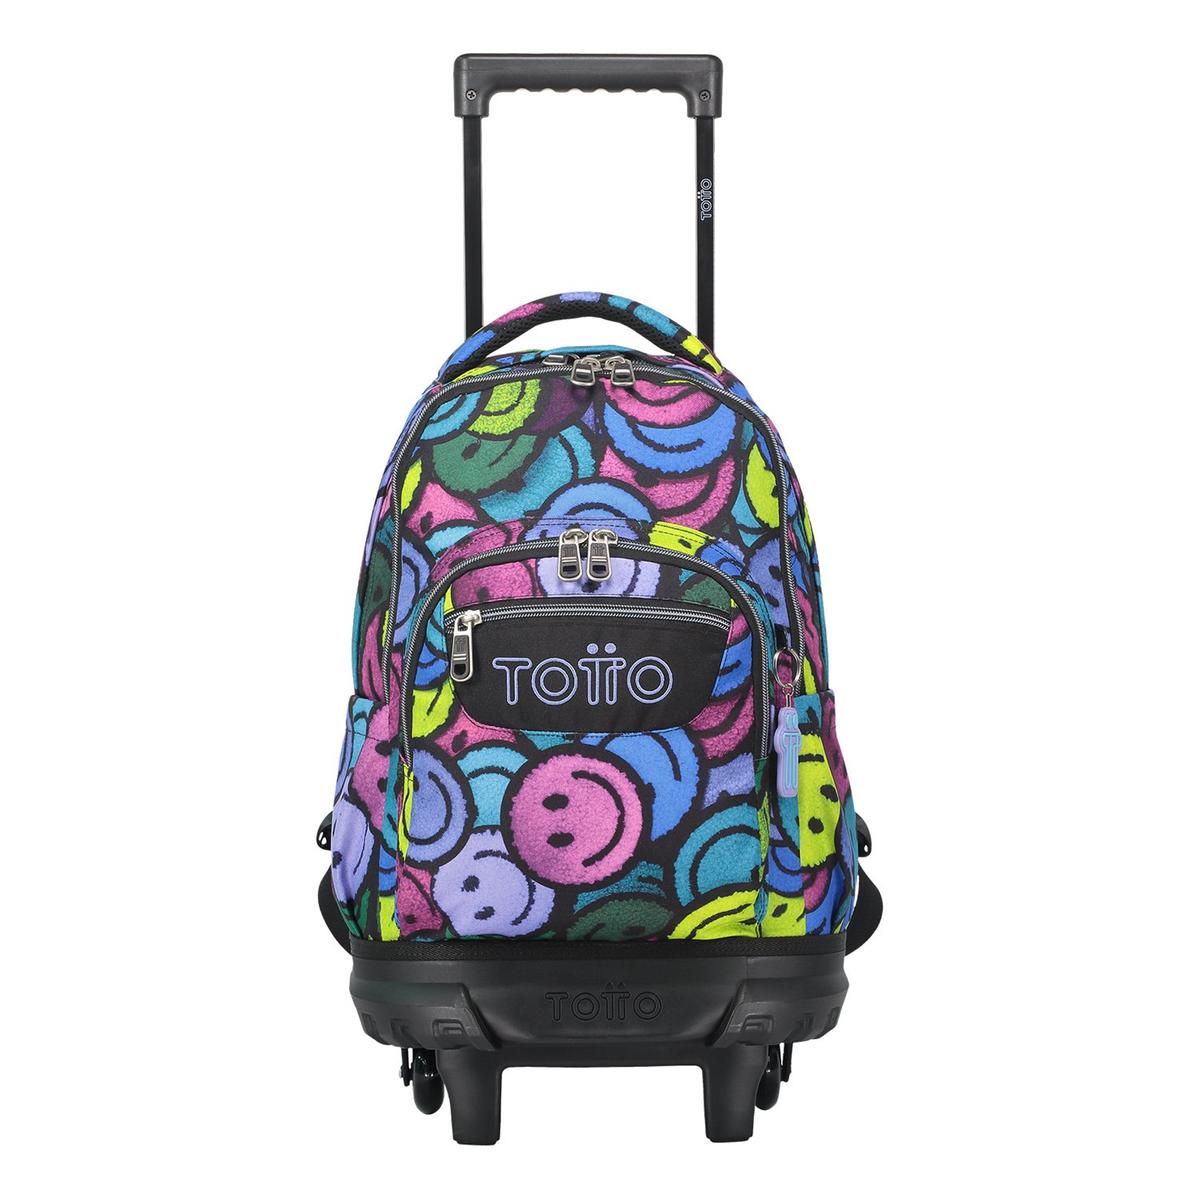 Totto Small School Backpack with Wheels - Emojis Resma